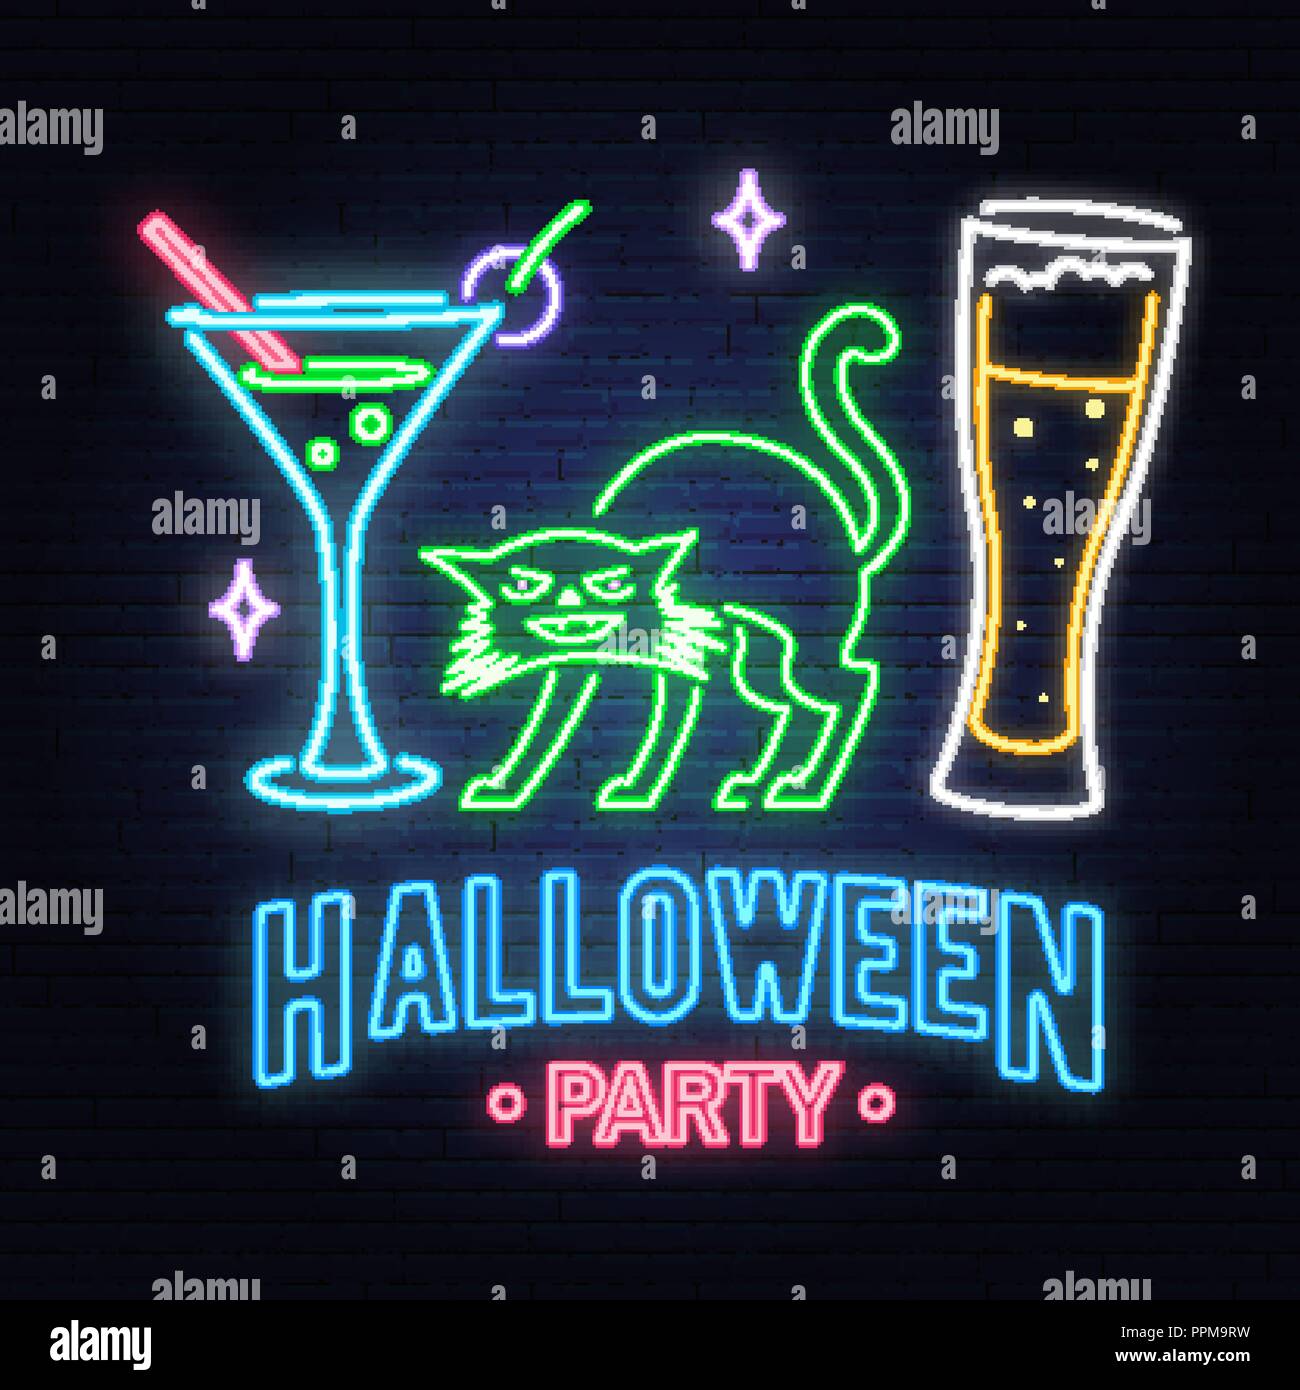 Halloween party neon sign. Vector illustration. Happy Halloween light banner with Beer, cocktail and cat. Night bright advertisement. Neon sign for banner, billboard, promotion or advertisement. Stock Vector